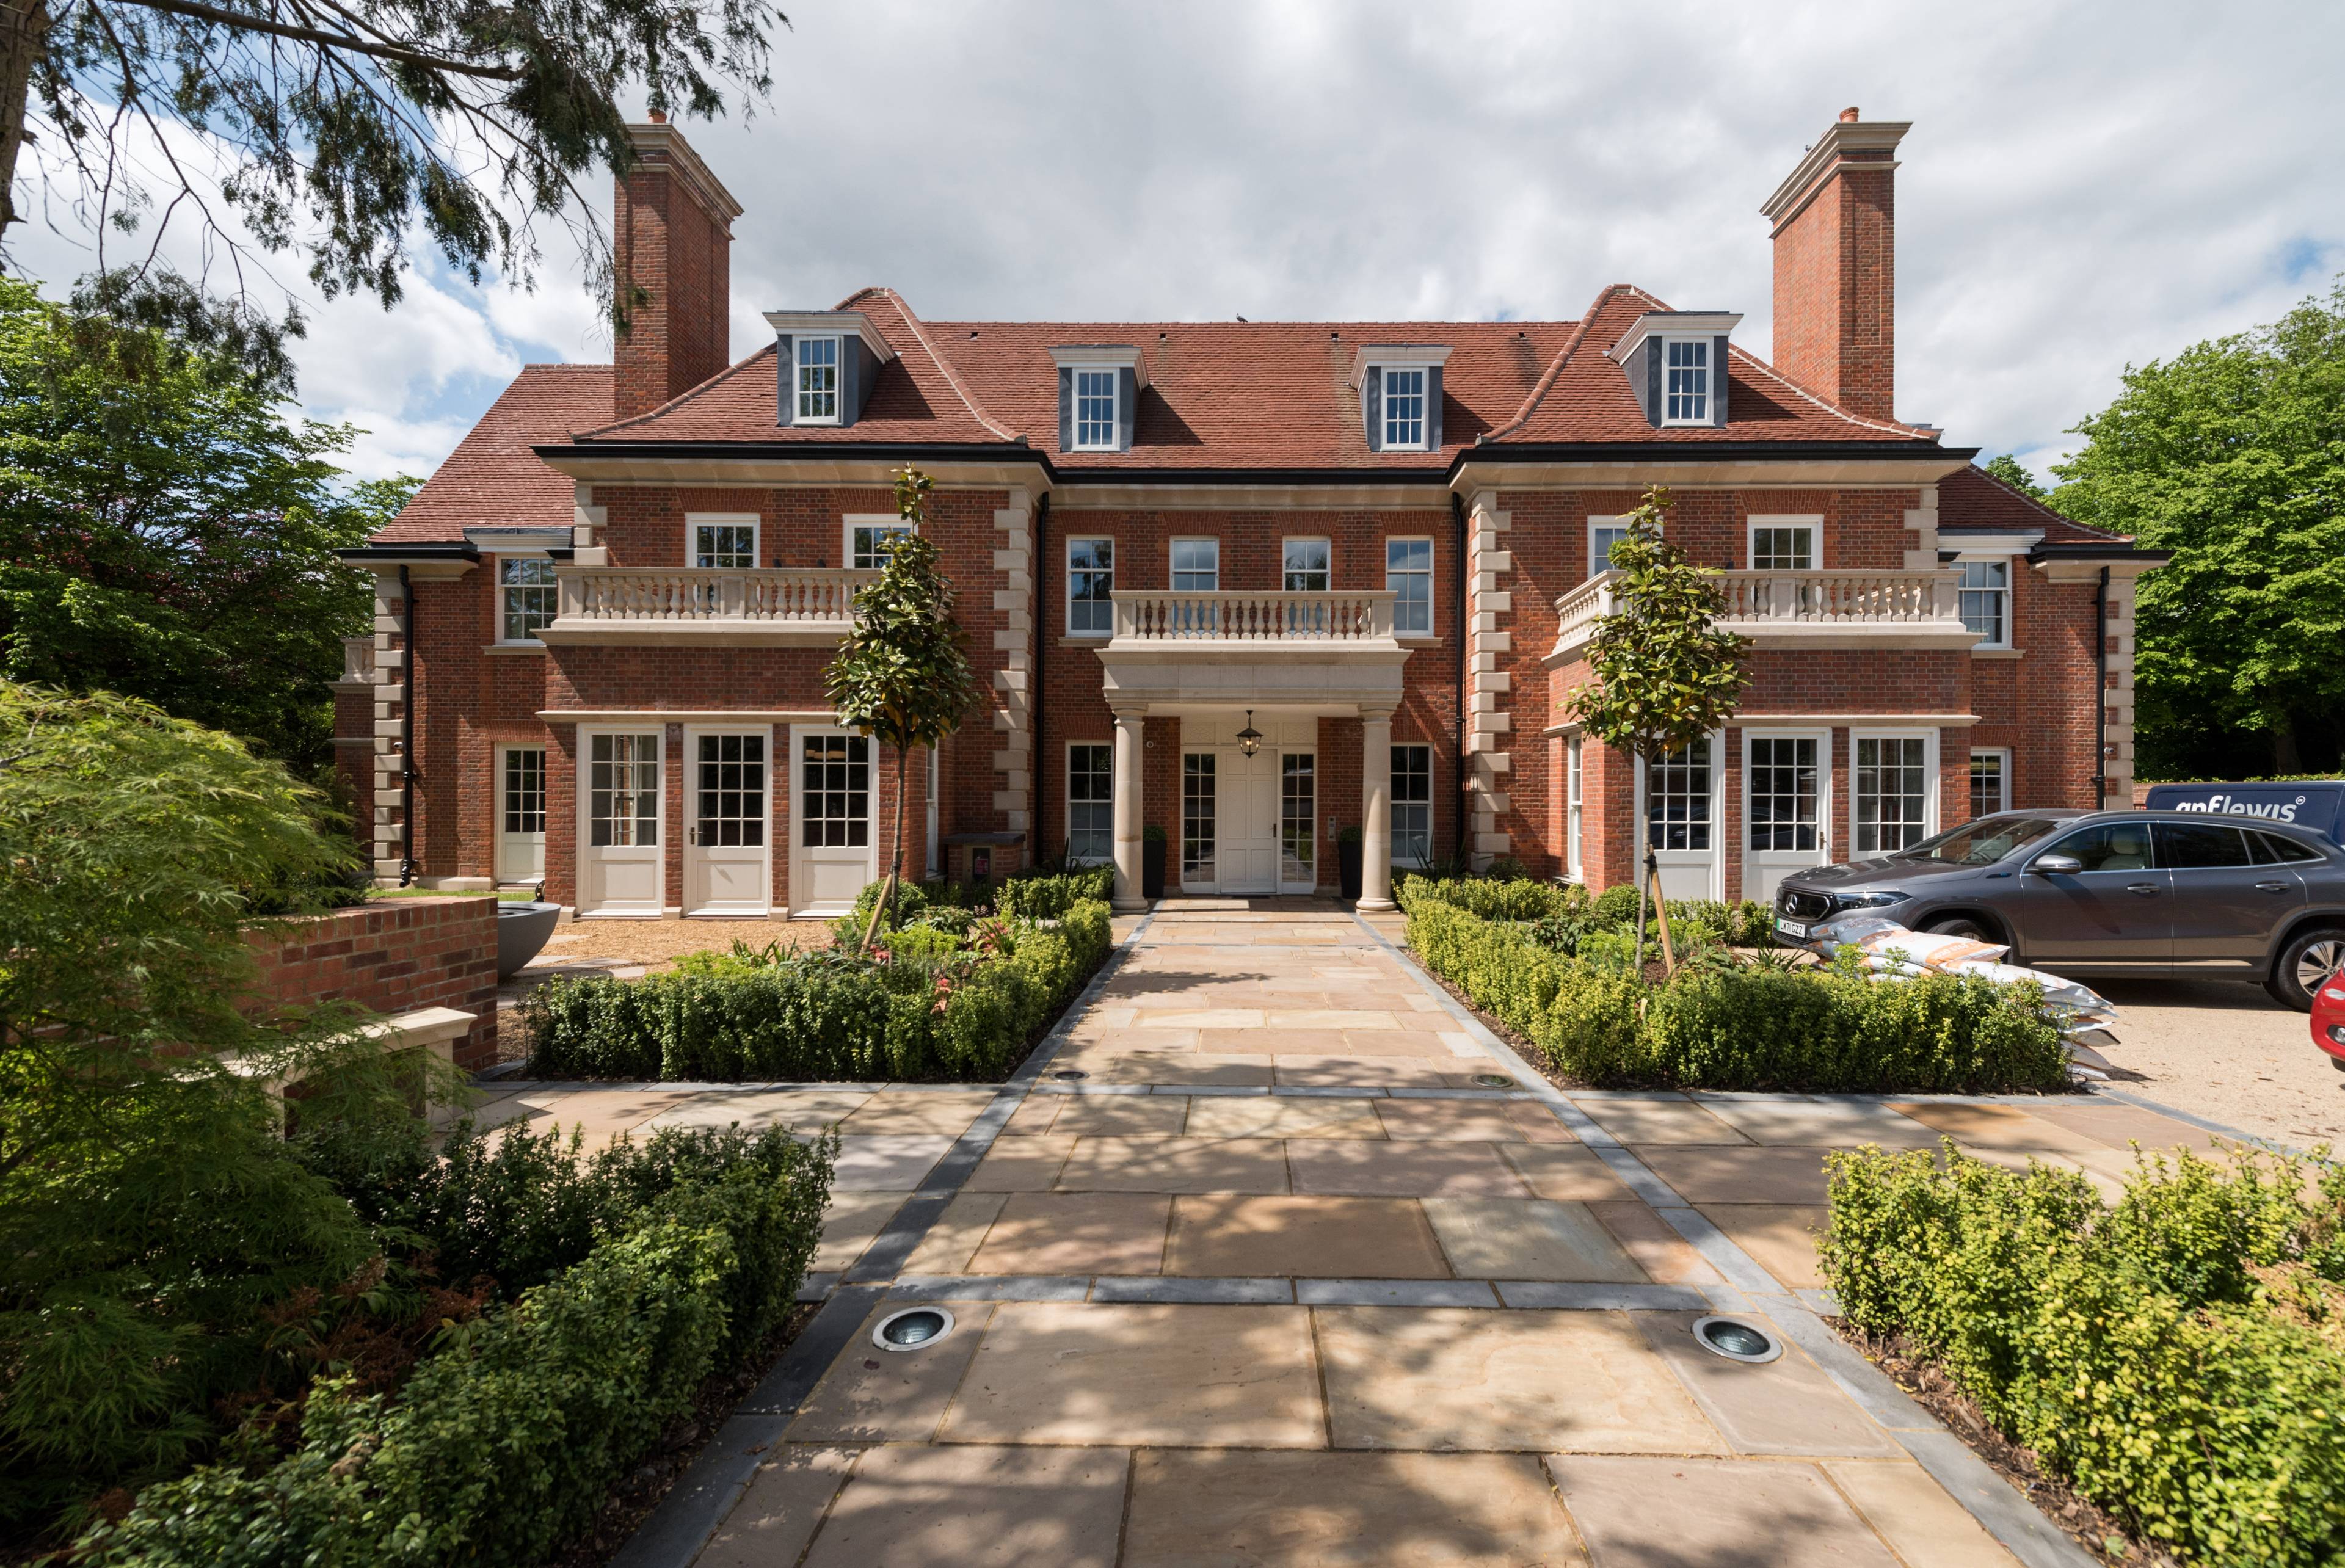 3 Bedroom Luxury Apartment - This exceptional new build 3 bedroom, 2 bathroom apartment boasts over 1650 sqft of high-end luxury living space. Situated on one of the most prestigious streets in the UK, this home brings a rare opportunity not to be missed!